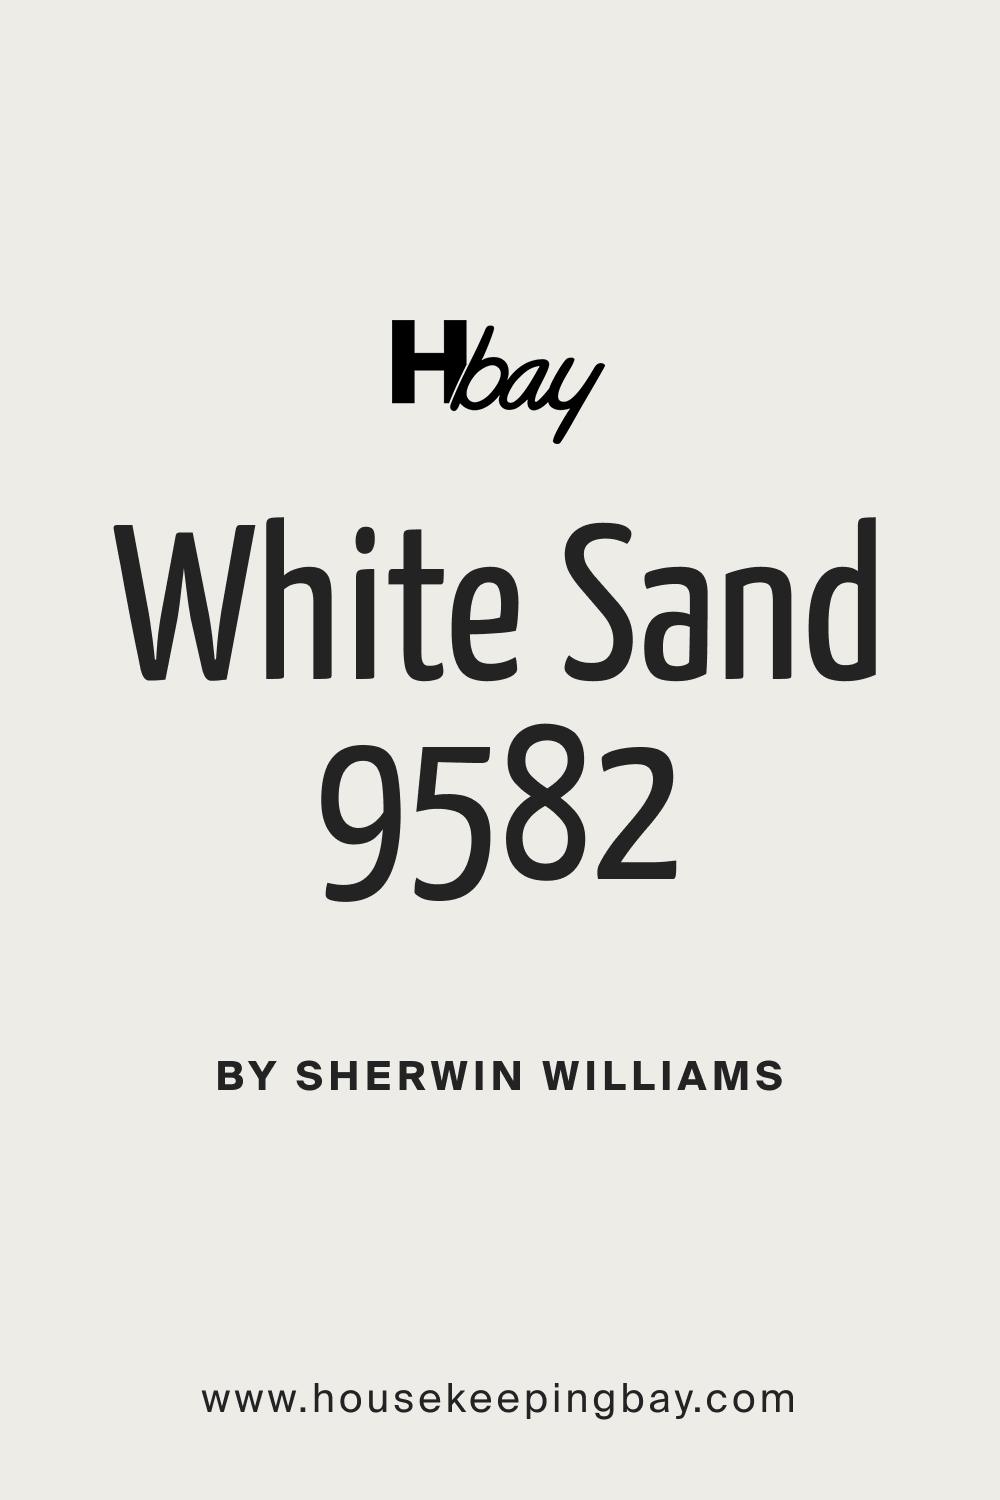 SW 9582 White Sand Paint Color by Sherwin Williams